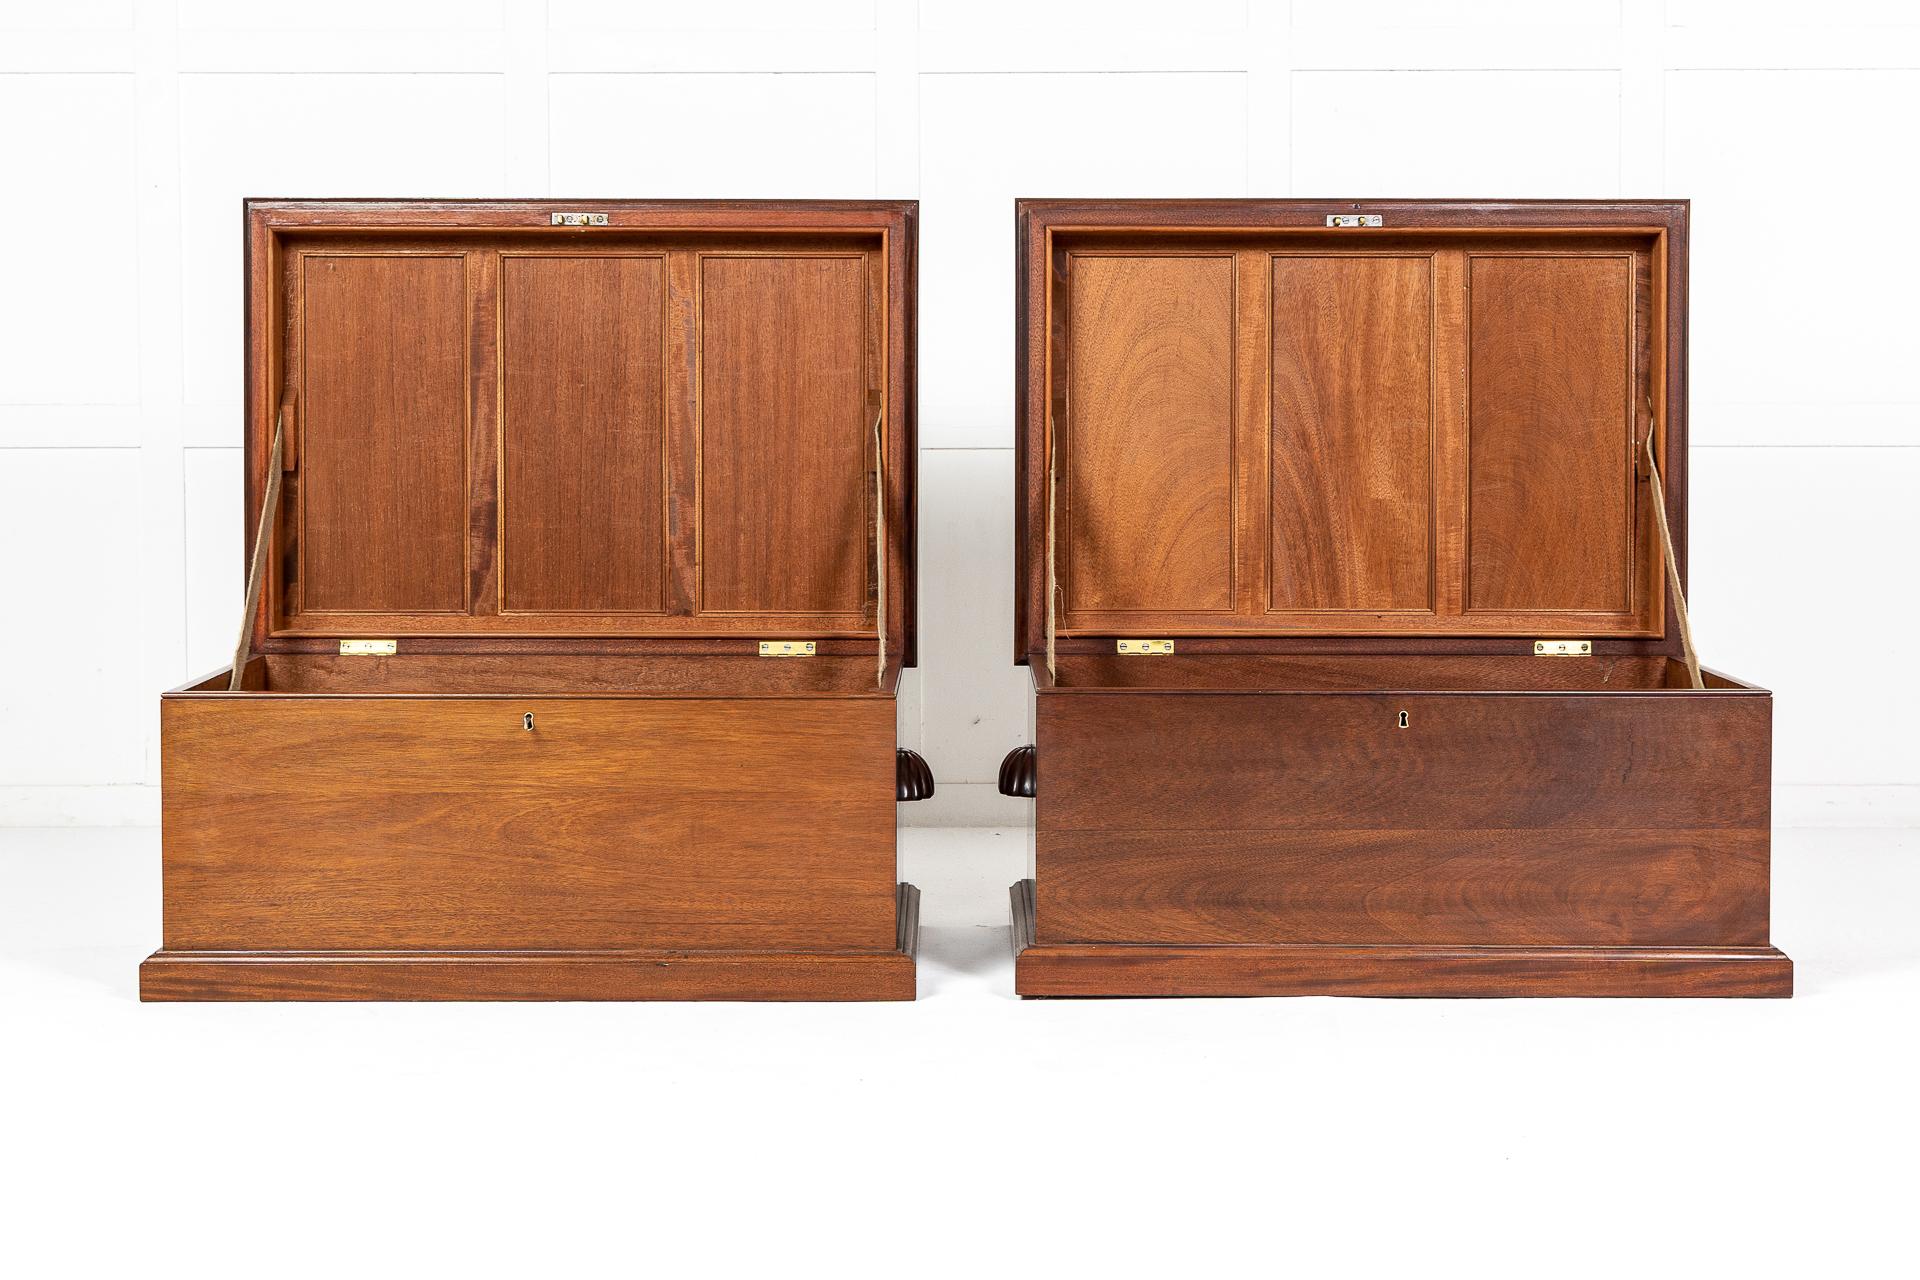 A pair of exceptional quality 1940s trunks constructed in solid mahogany. Having panelled tops with hinged lids that stay open with fabric stays. A well-presented, fine quality panelled interior offers lots of space for storage. Carved wooden, cup